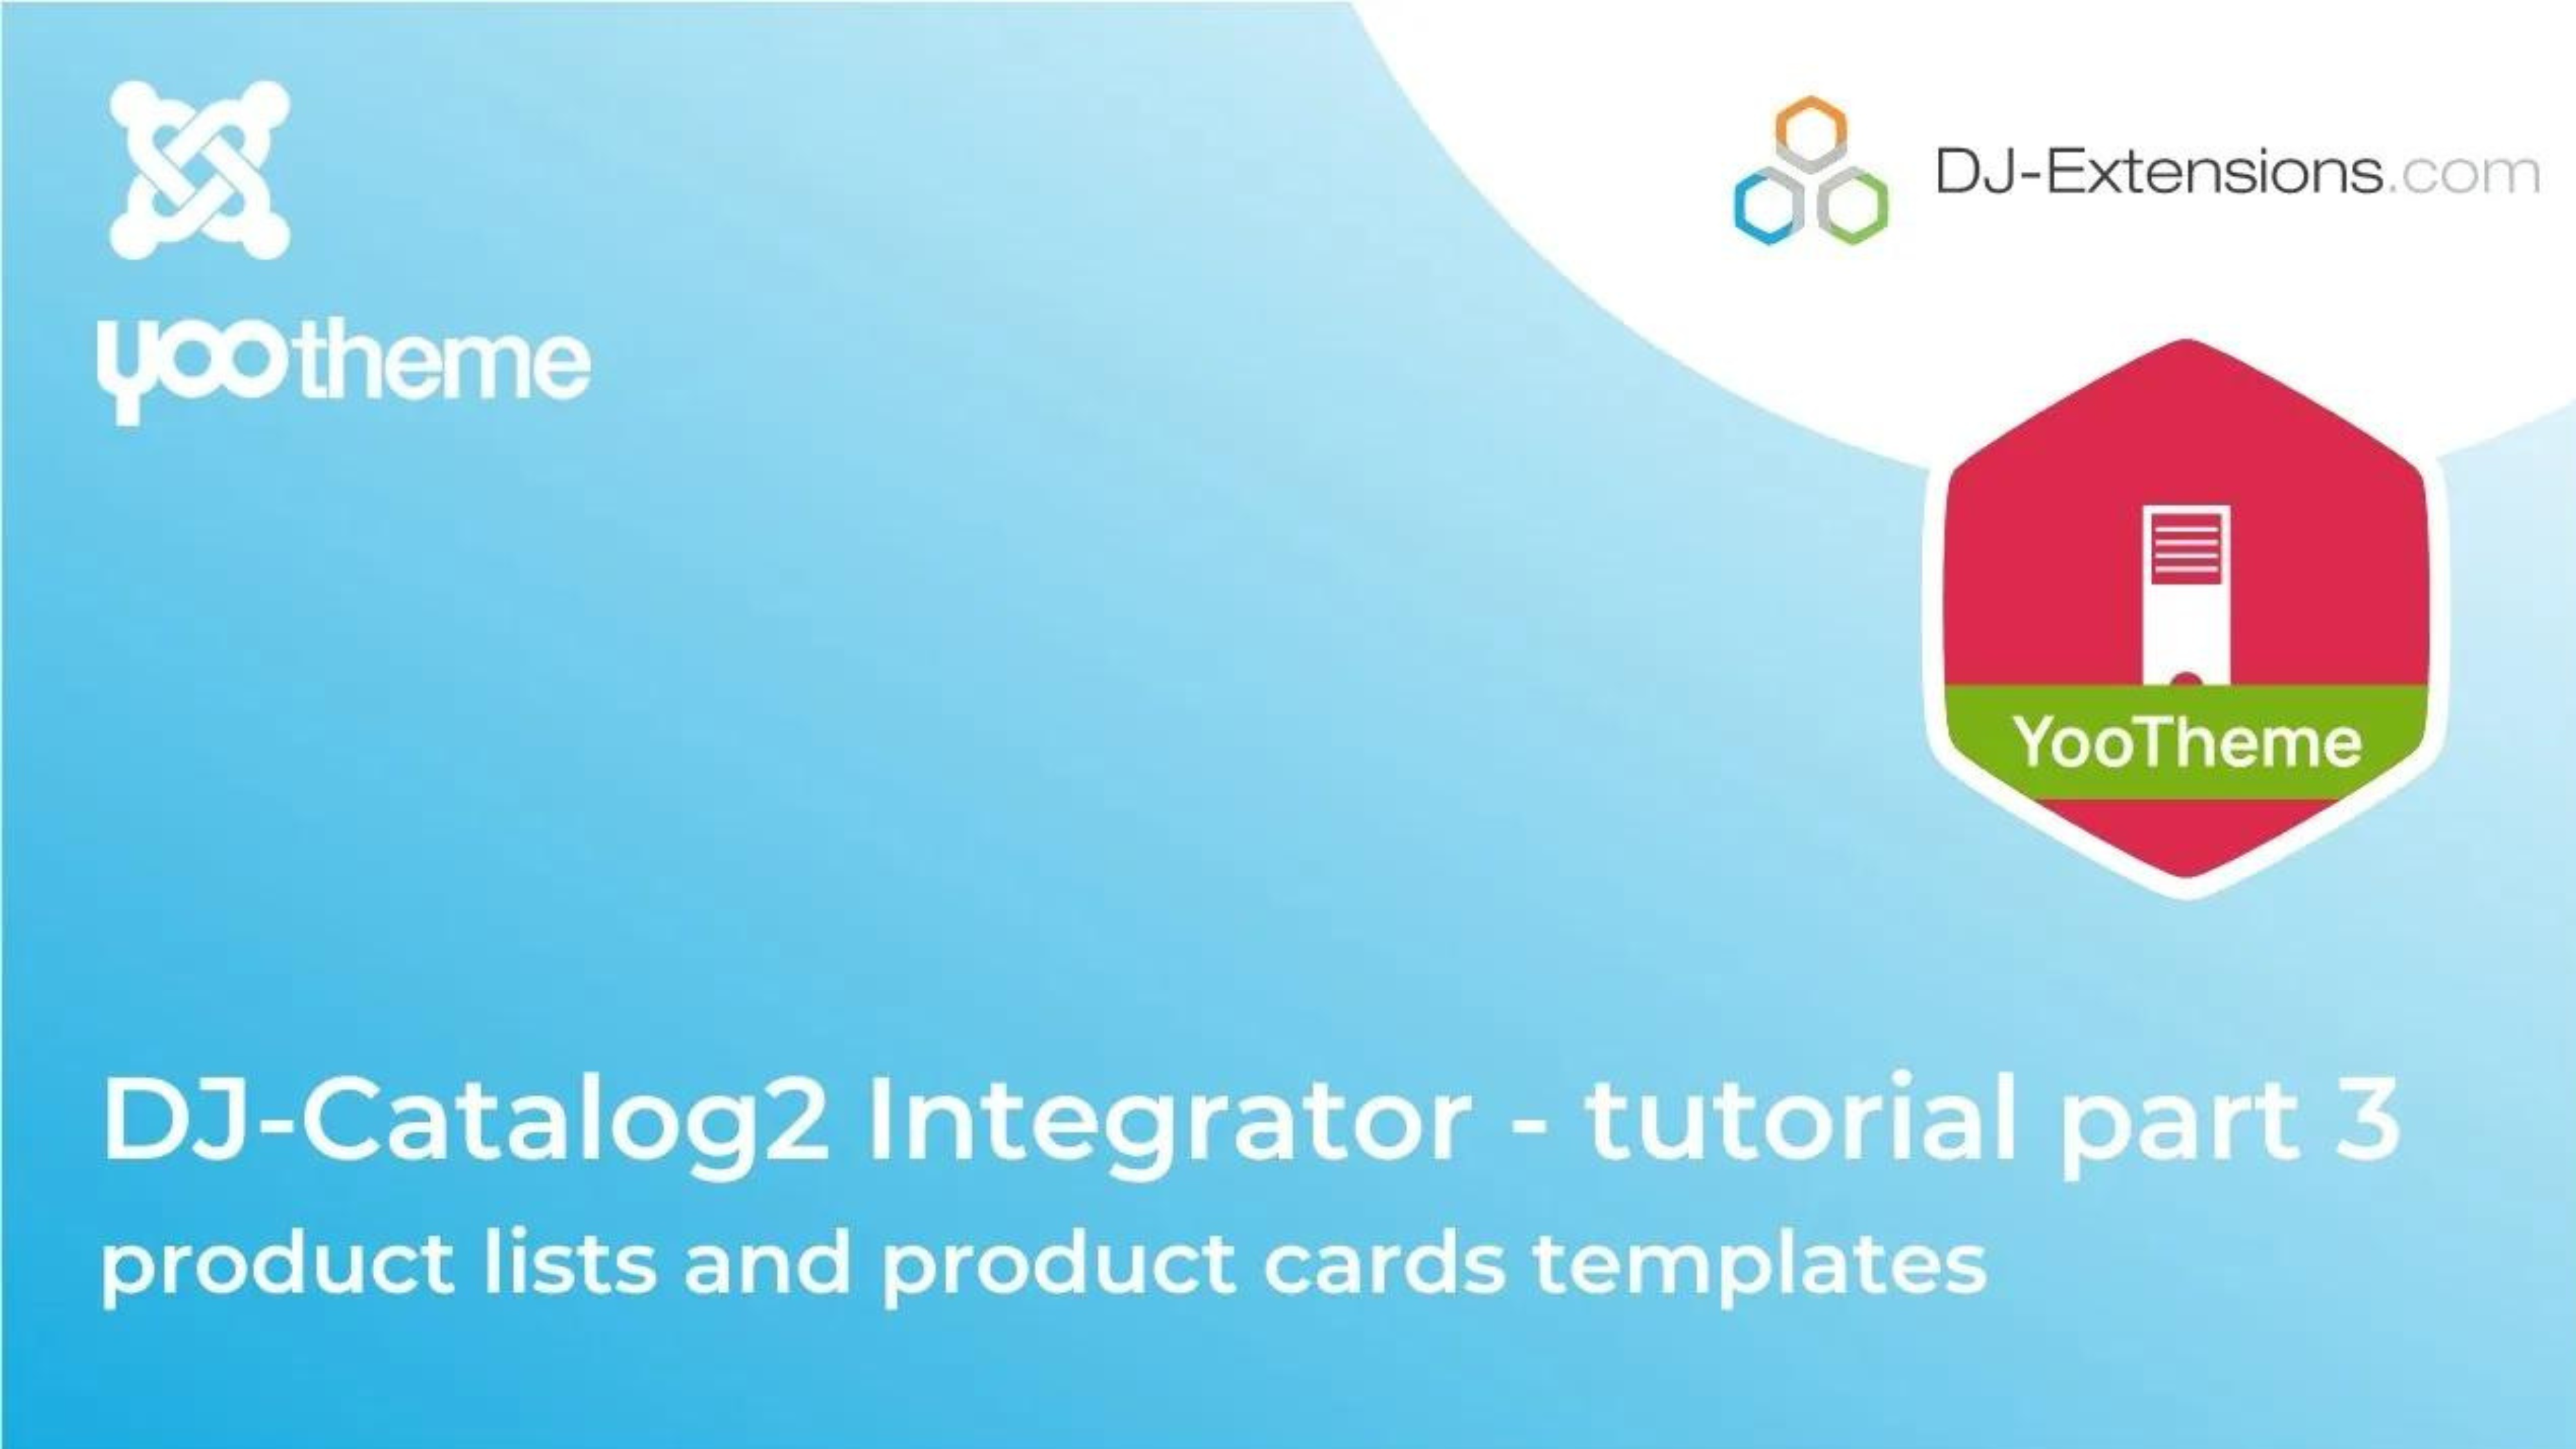 Dj-Catalog2 YOOTheme PRO Integrator product lists and product cards templates tutorial